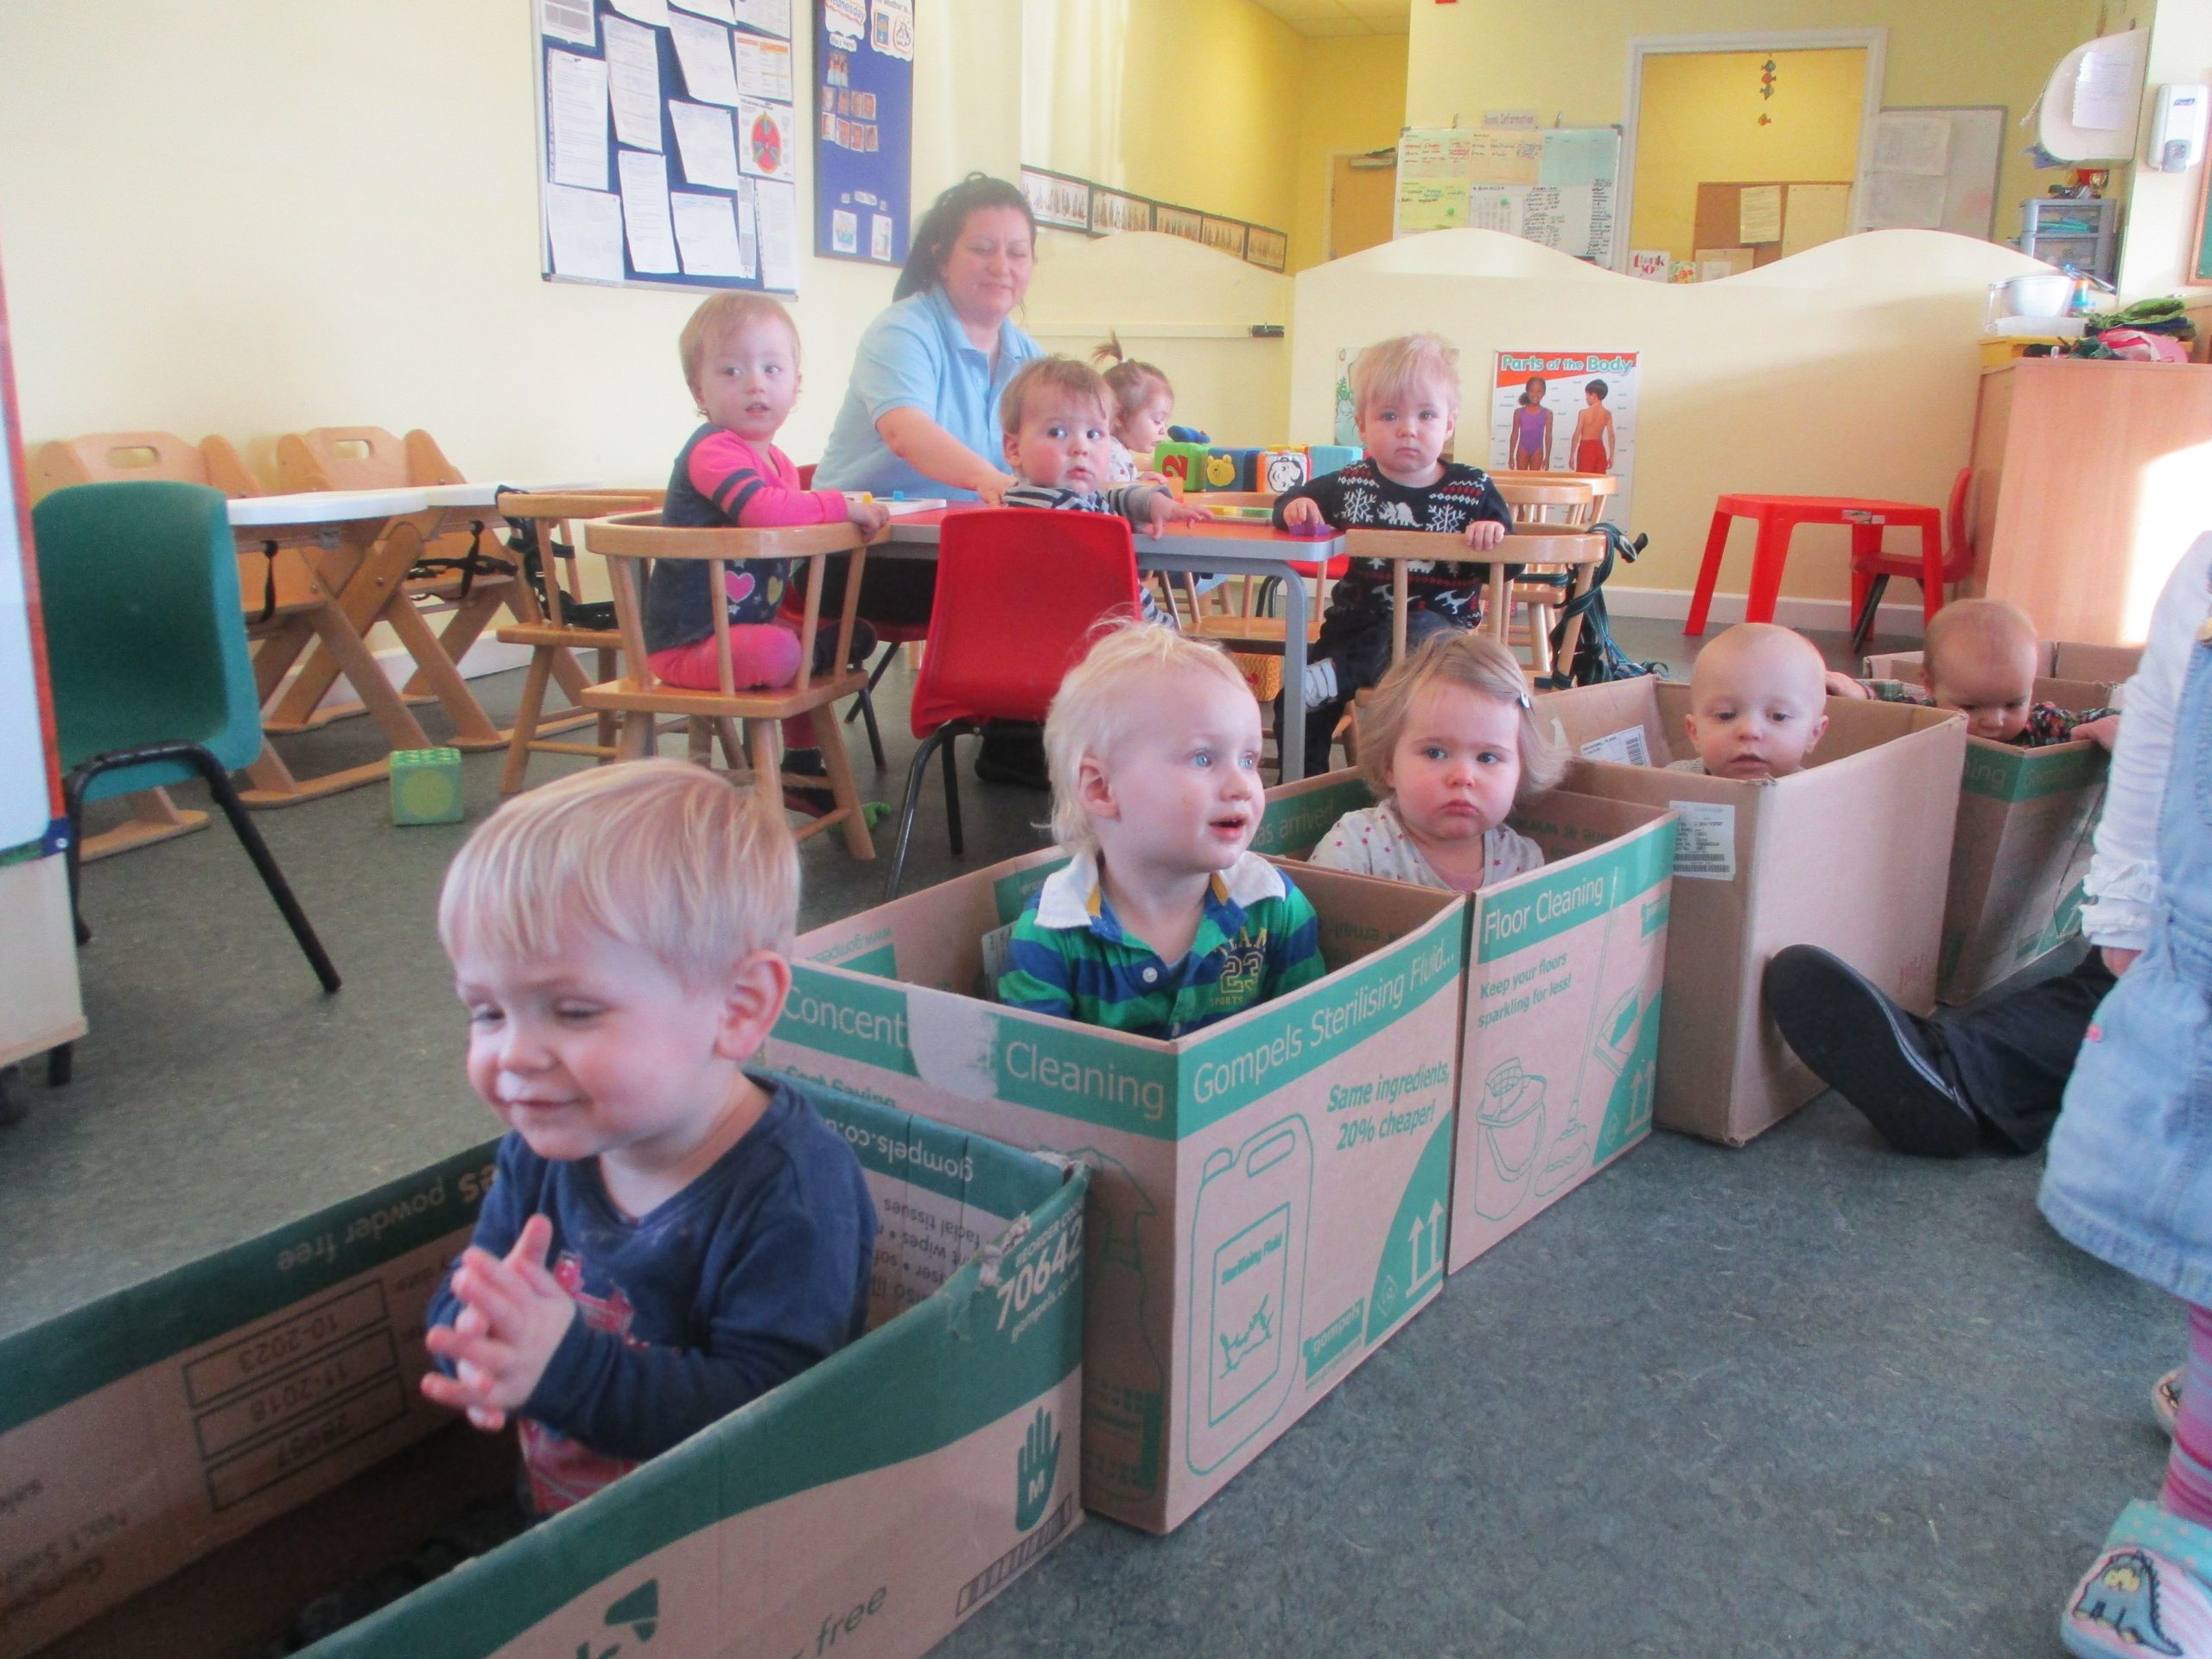 A picture of children playing in cardboard boxes.